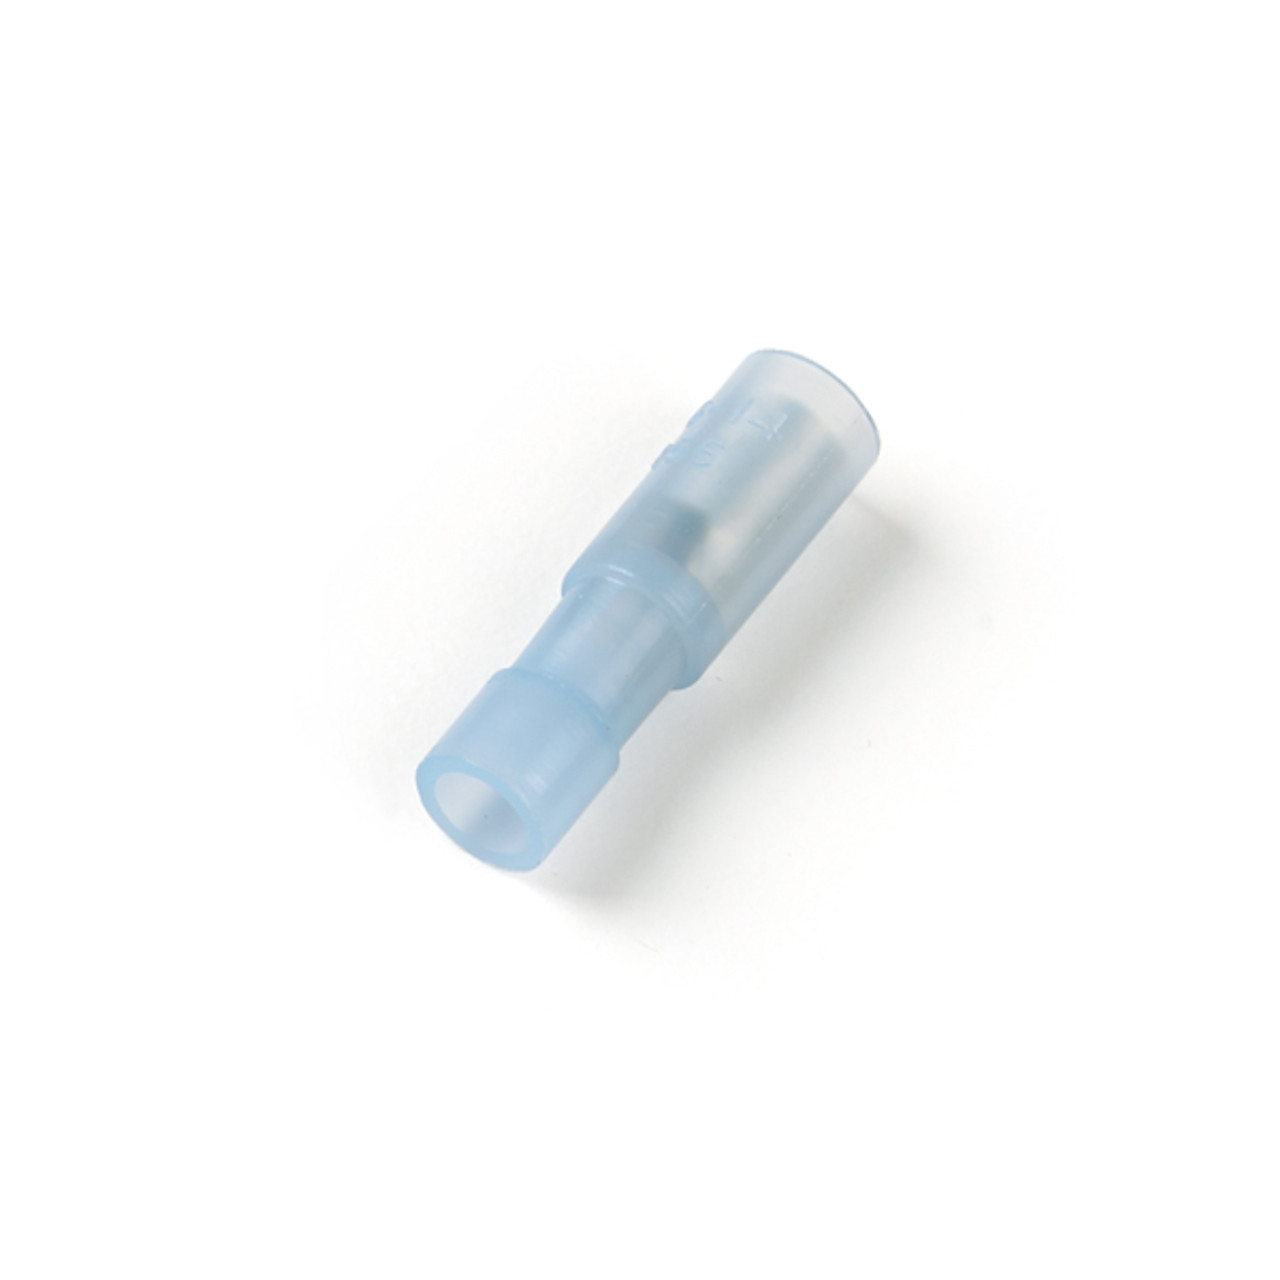 16 - 14 AWG Nylon Receptacle Connectors Female .180" @ 15 Pack - Blue  84-2402